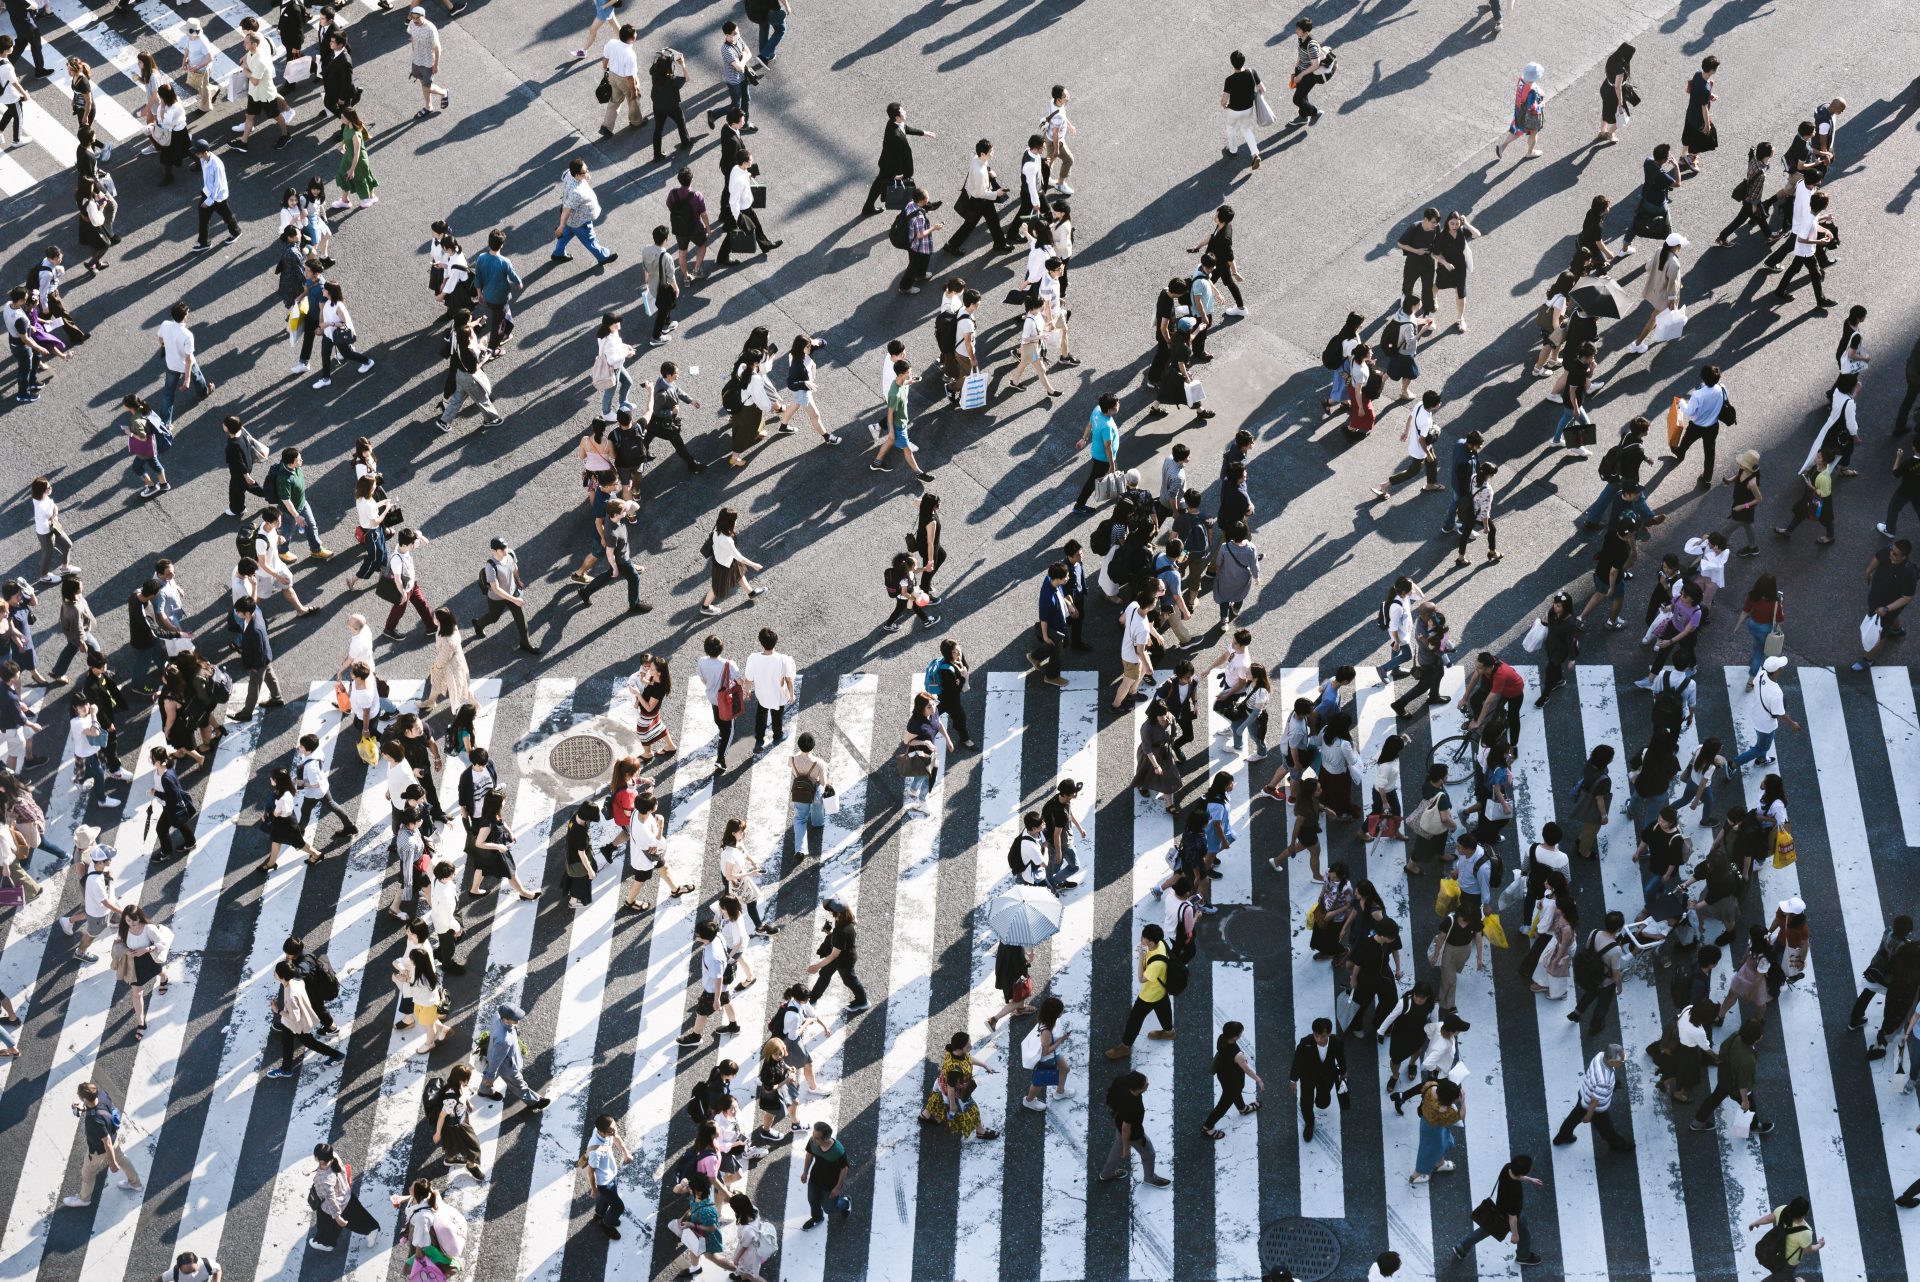 A crowd crossing a road during the day seen from above